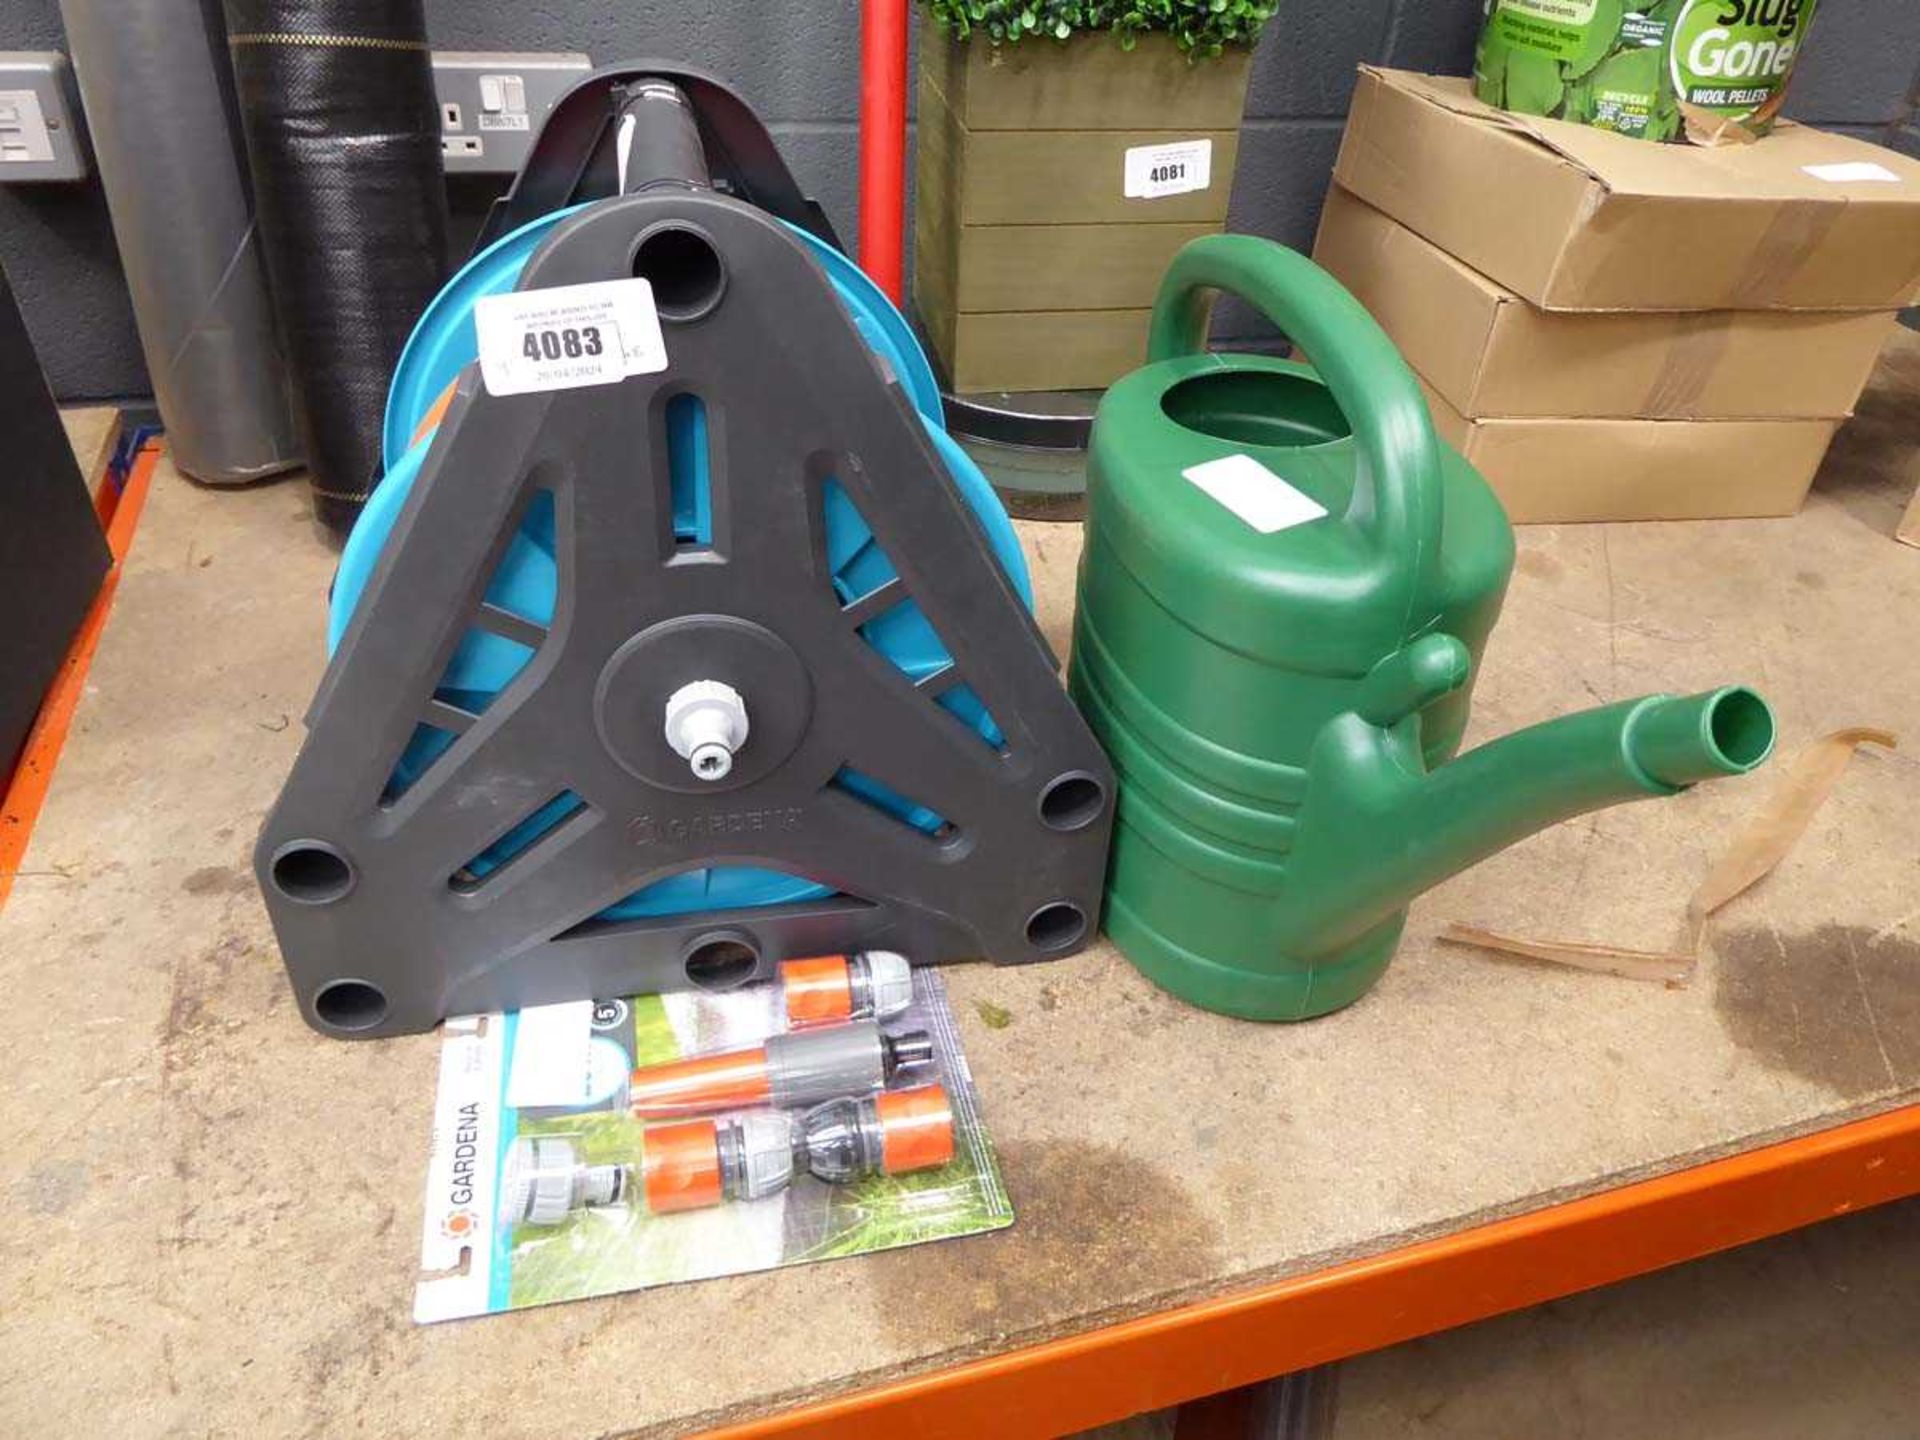 +VAT Gardenia garden hose with connectors, and watering can